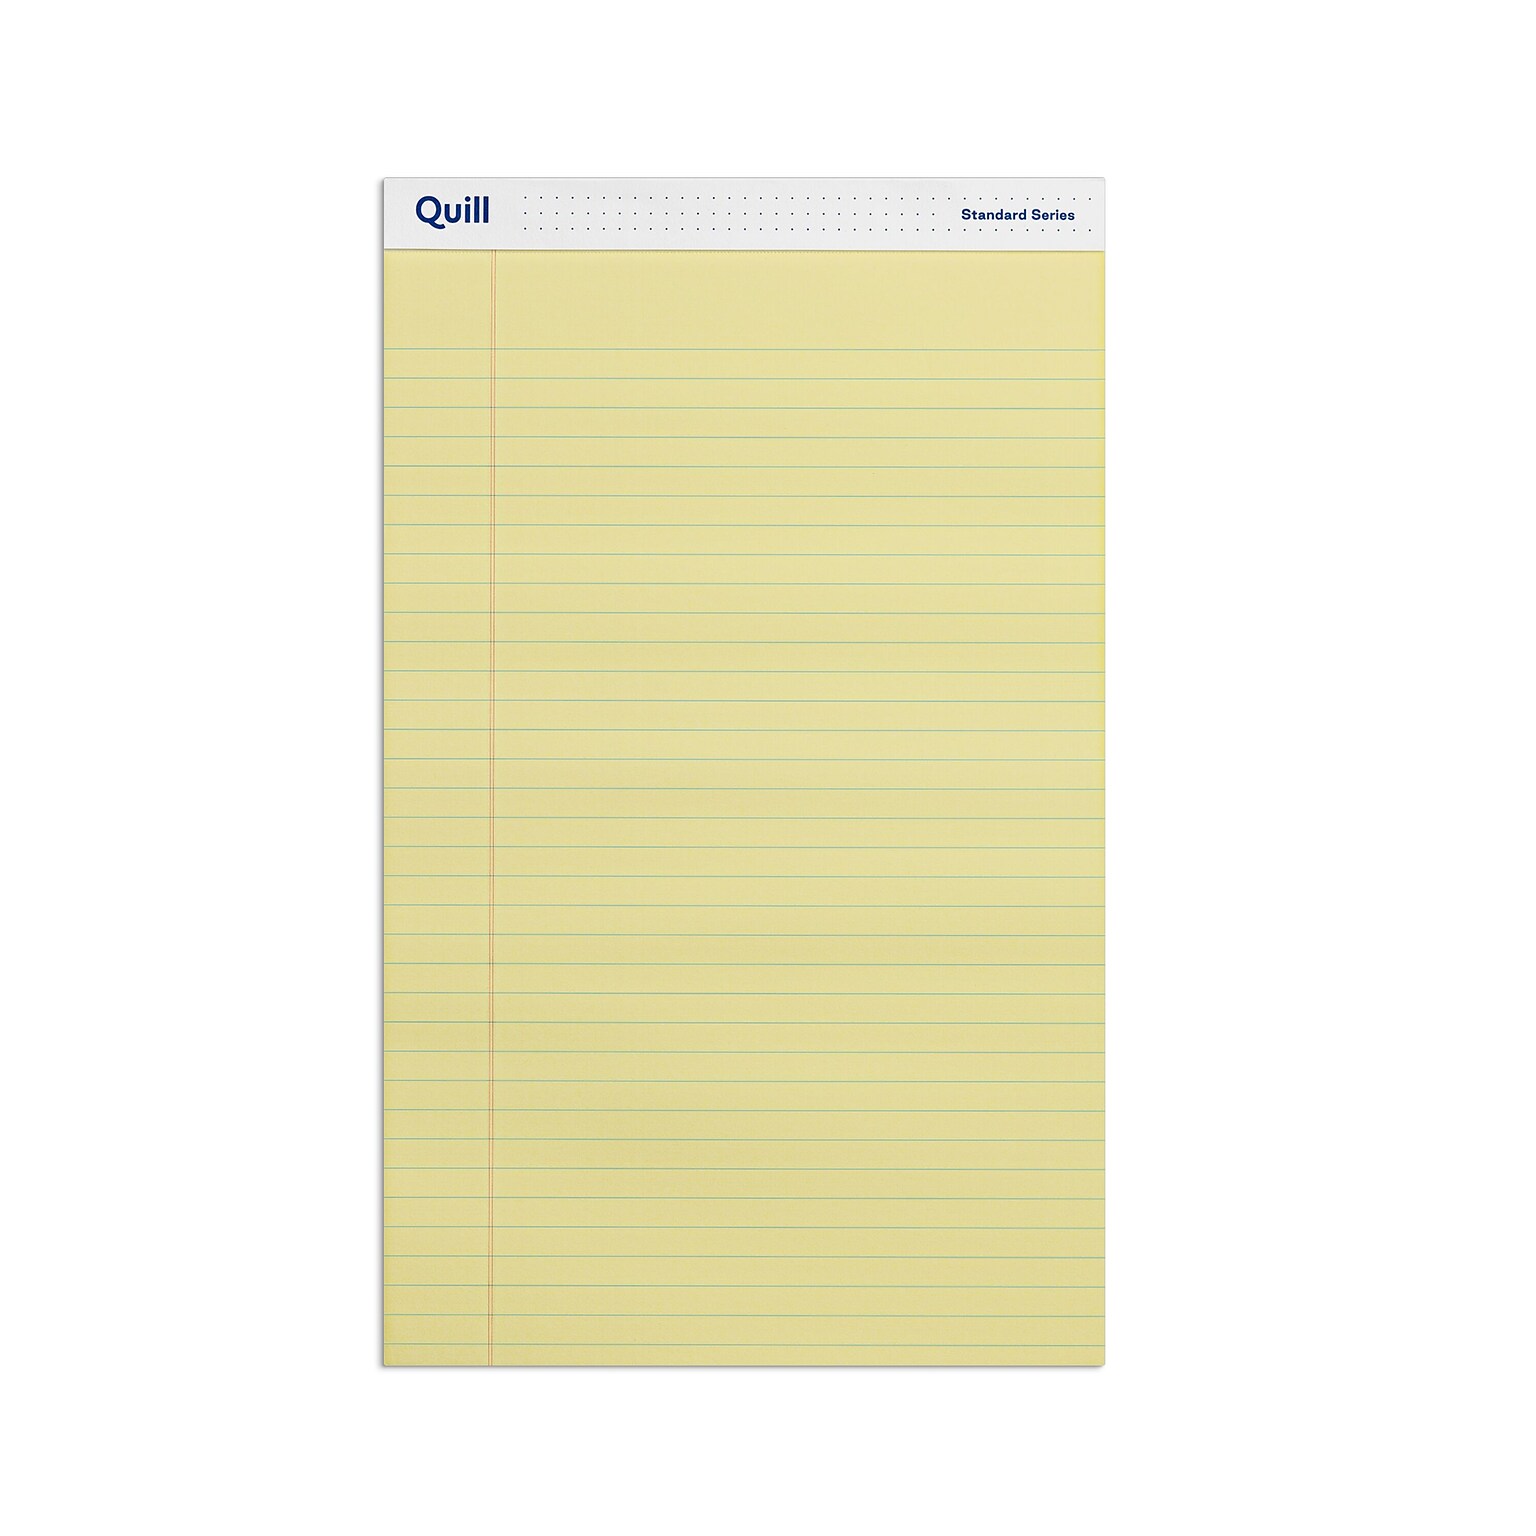 Quill Brand® Standard Series Legal Pad, 8-1/2 x 14, Wide Ruled, Canary Yellow, 50 Sheets/Pad, 12 Pads/Pack (740022L)